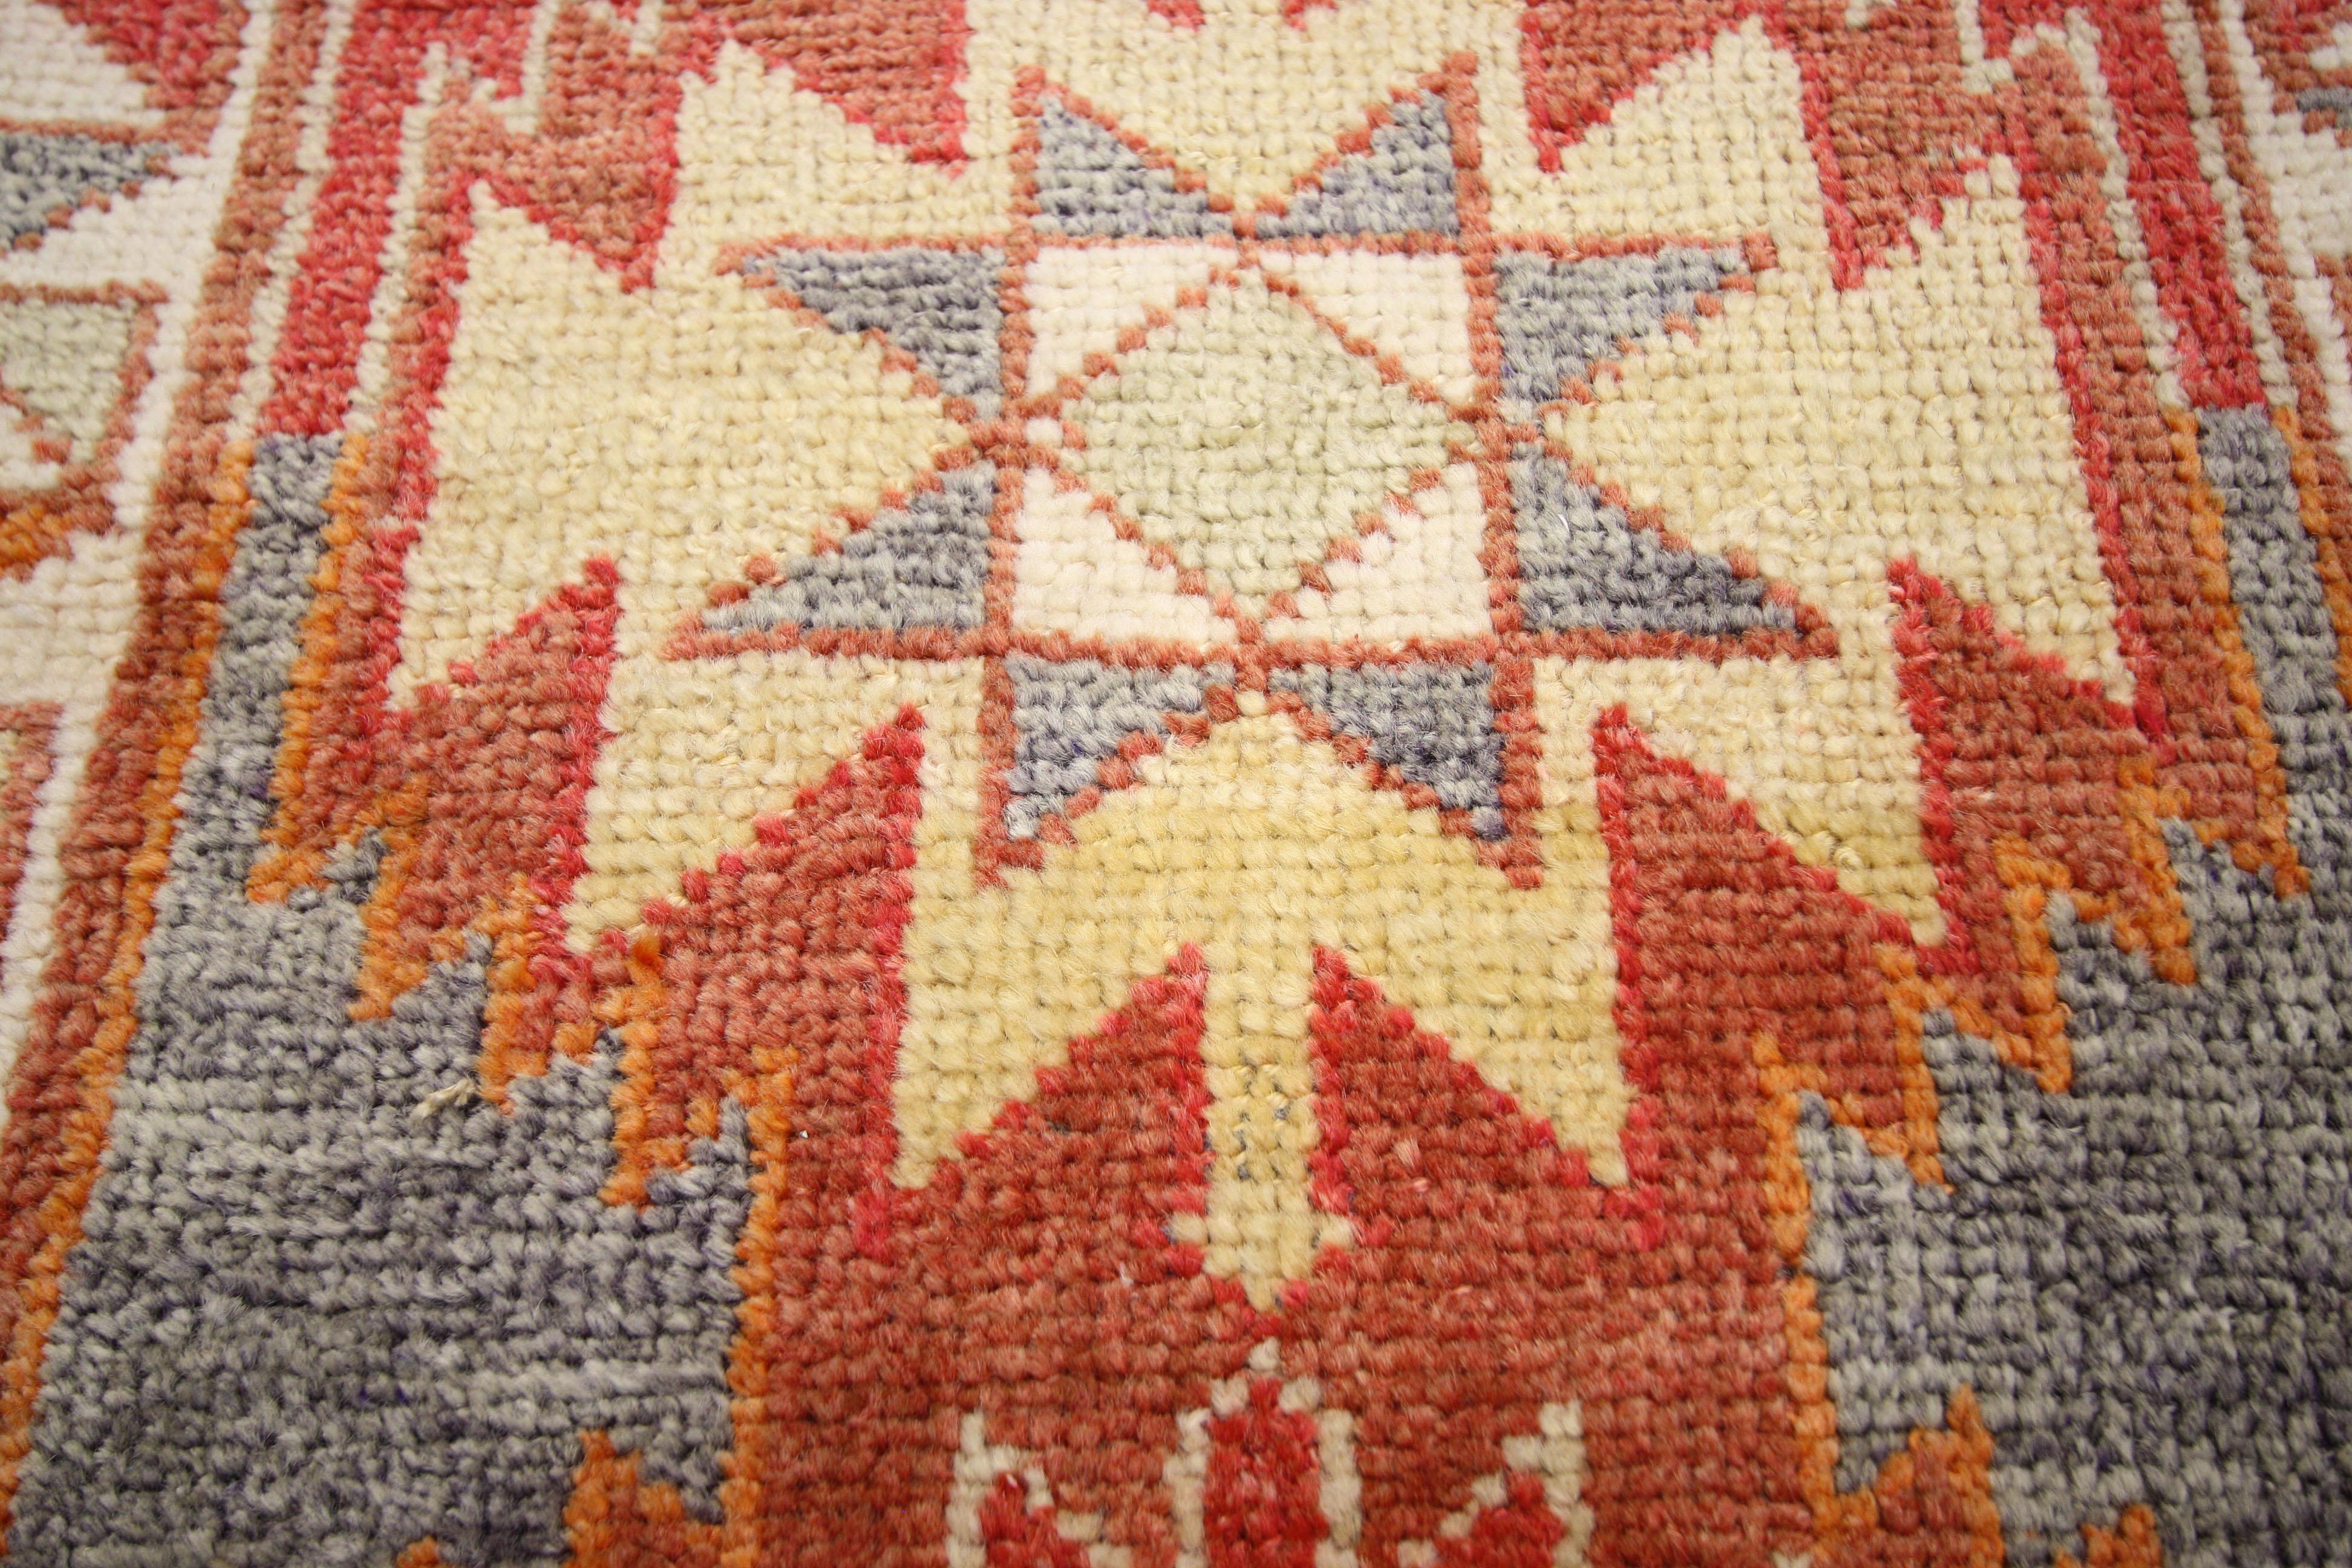 52313, vintage Turkish Oushak runner with tribal style, long hallway runner. This hand-knotted wool vintage Turkish Oushak runner features angular Bergama-style medallions in alternating colors along the center of an abrashed terra cotta and brick